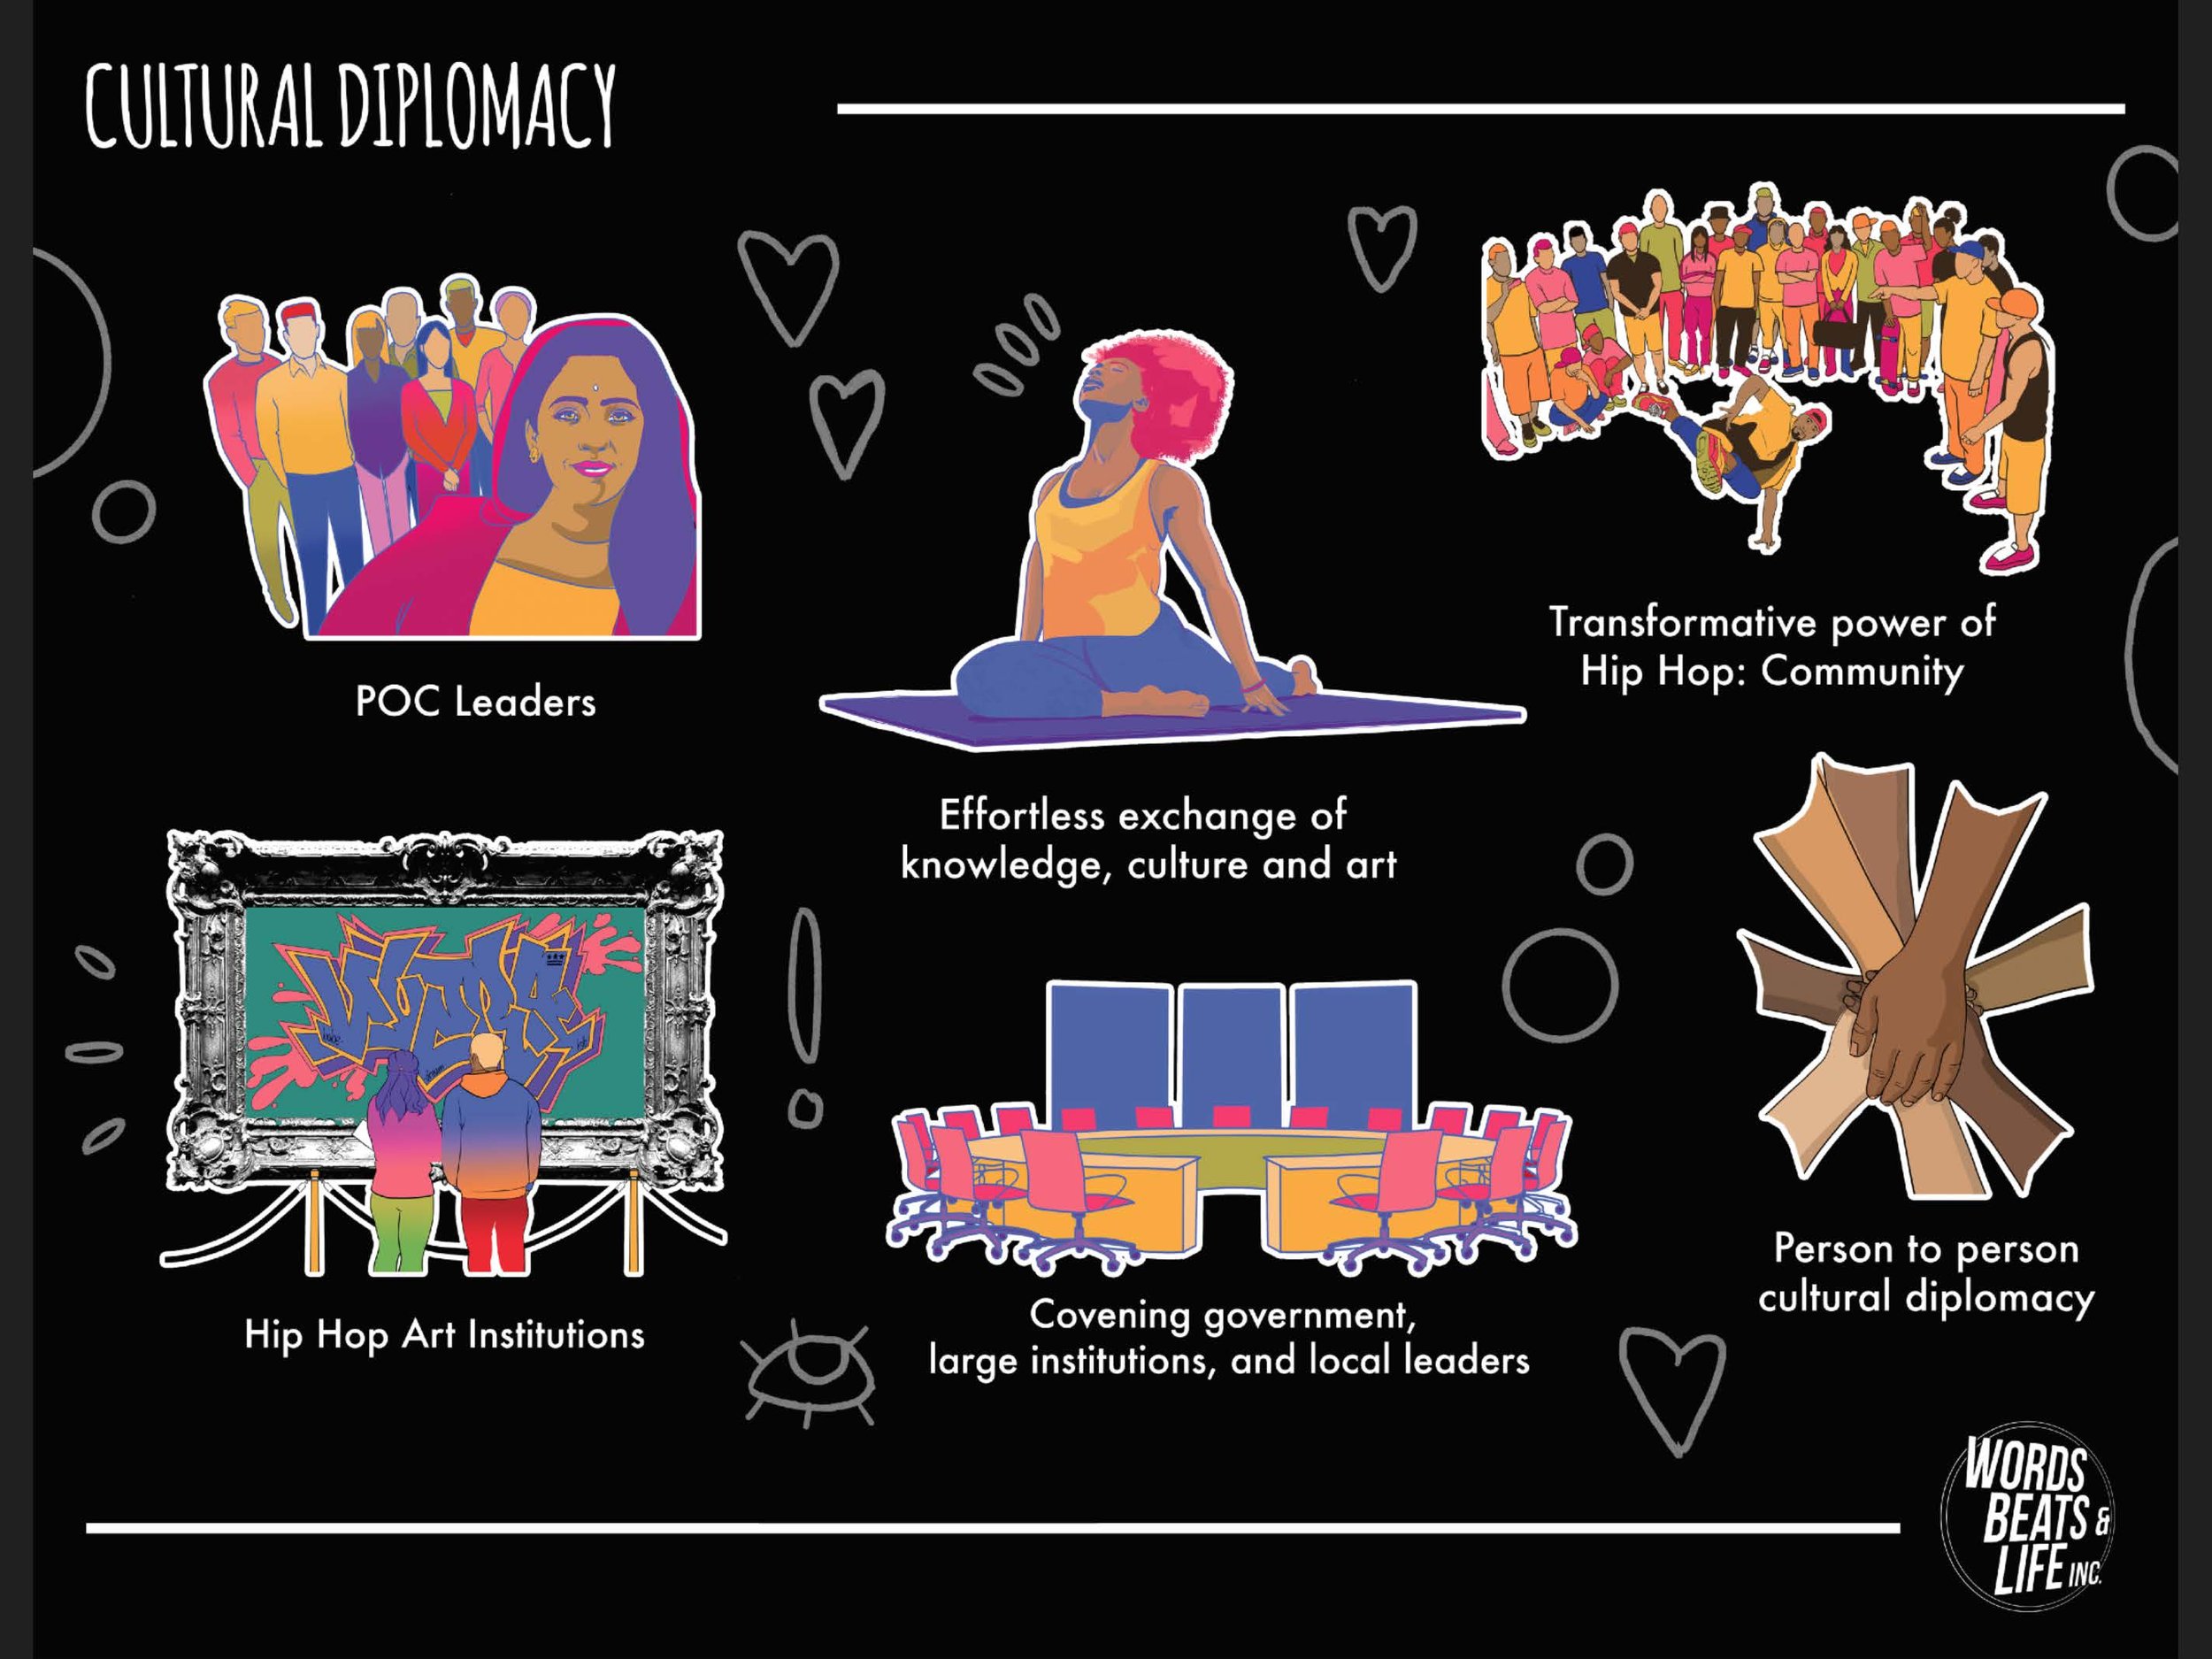 Information about Cultural Diplomacy